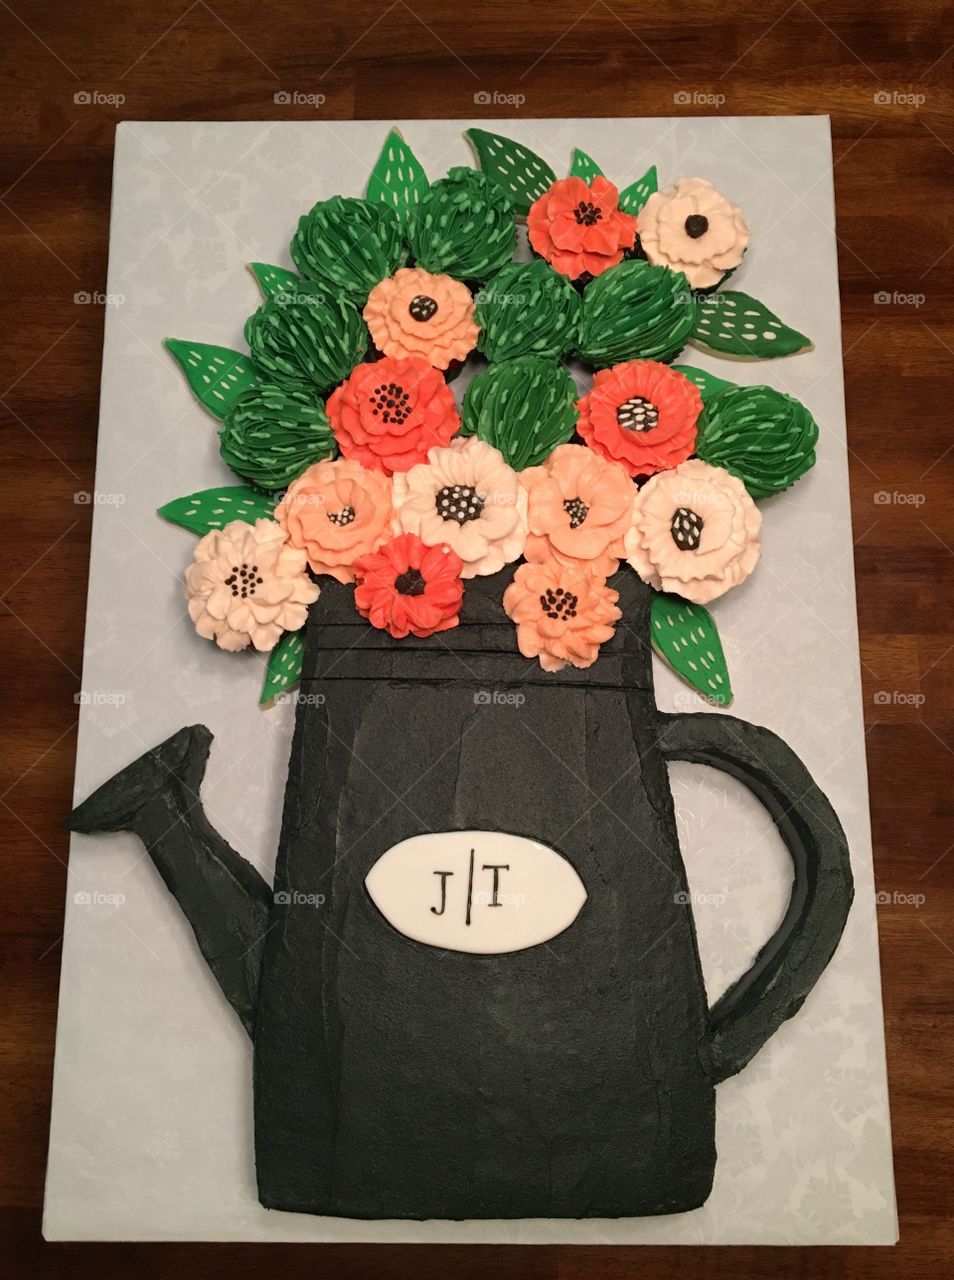 Bridal shower watering can cake with flowers